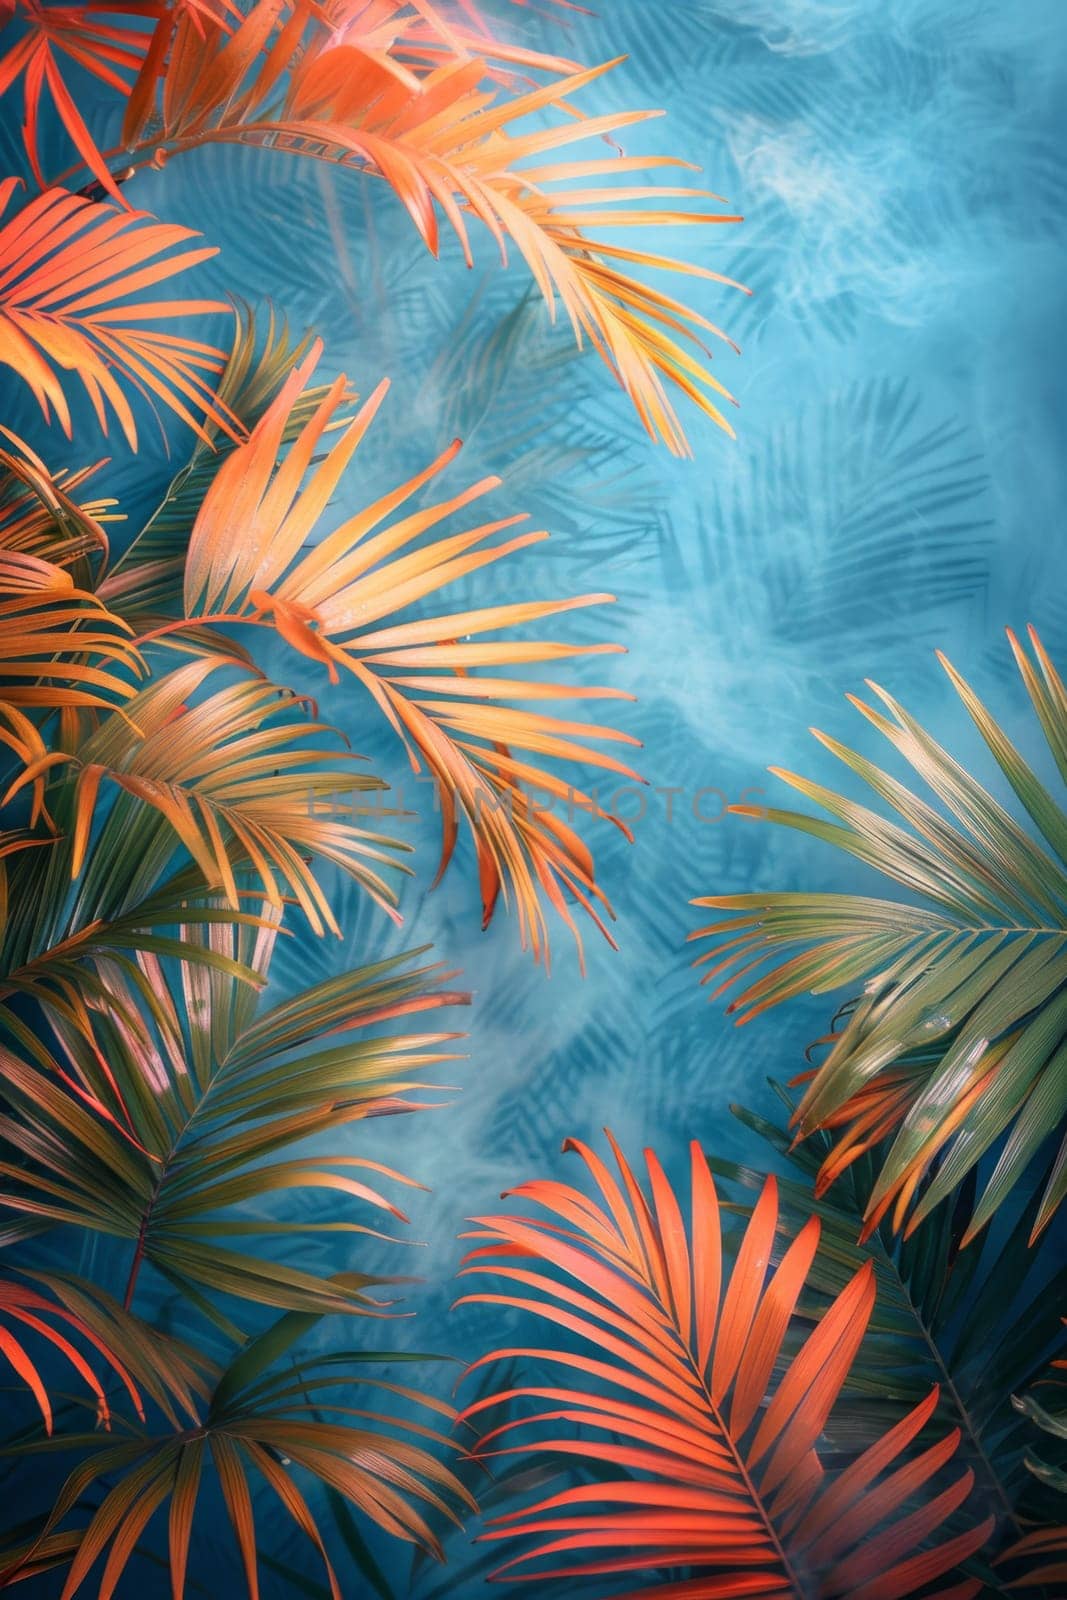 Abstract background with palm leaves.